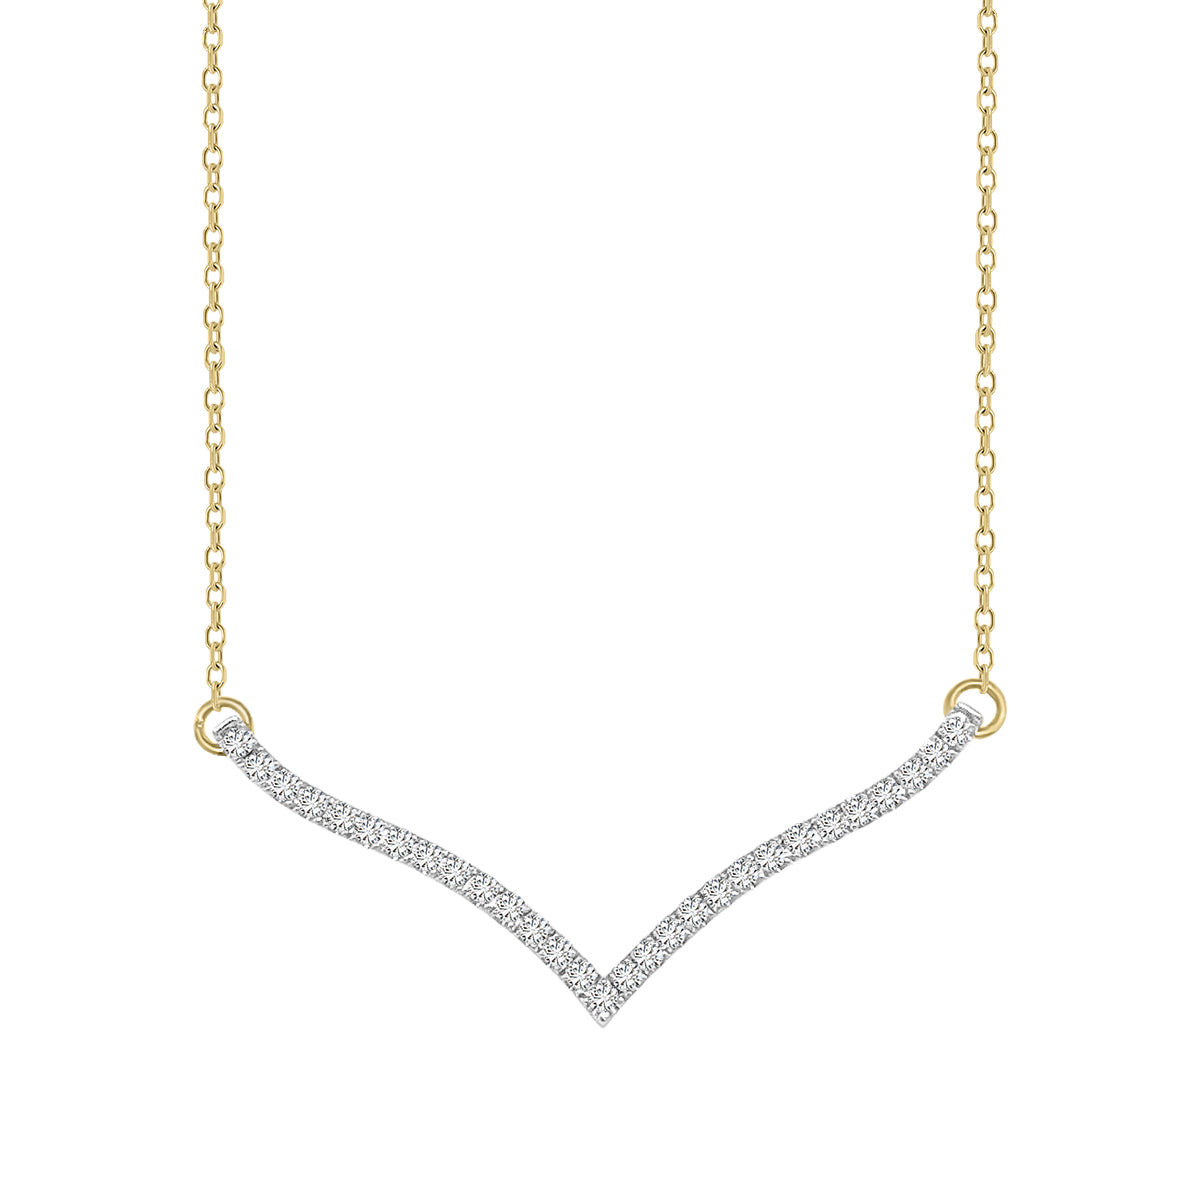 Diamond Necklace In 18k Yellow Gold.